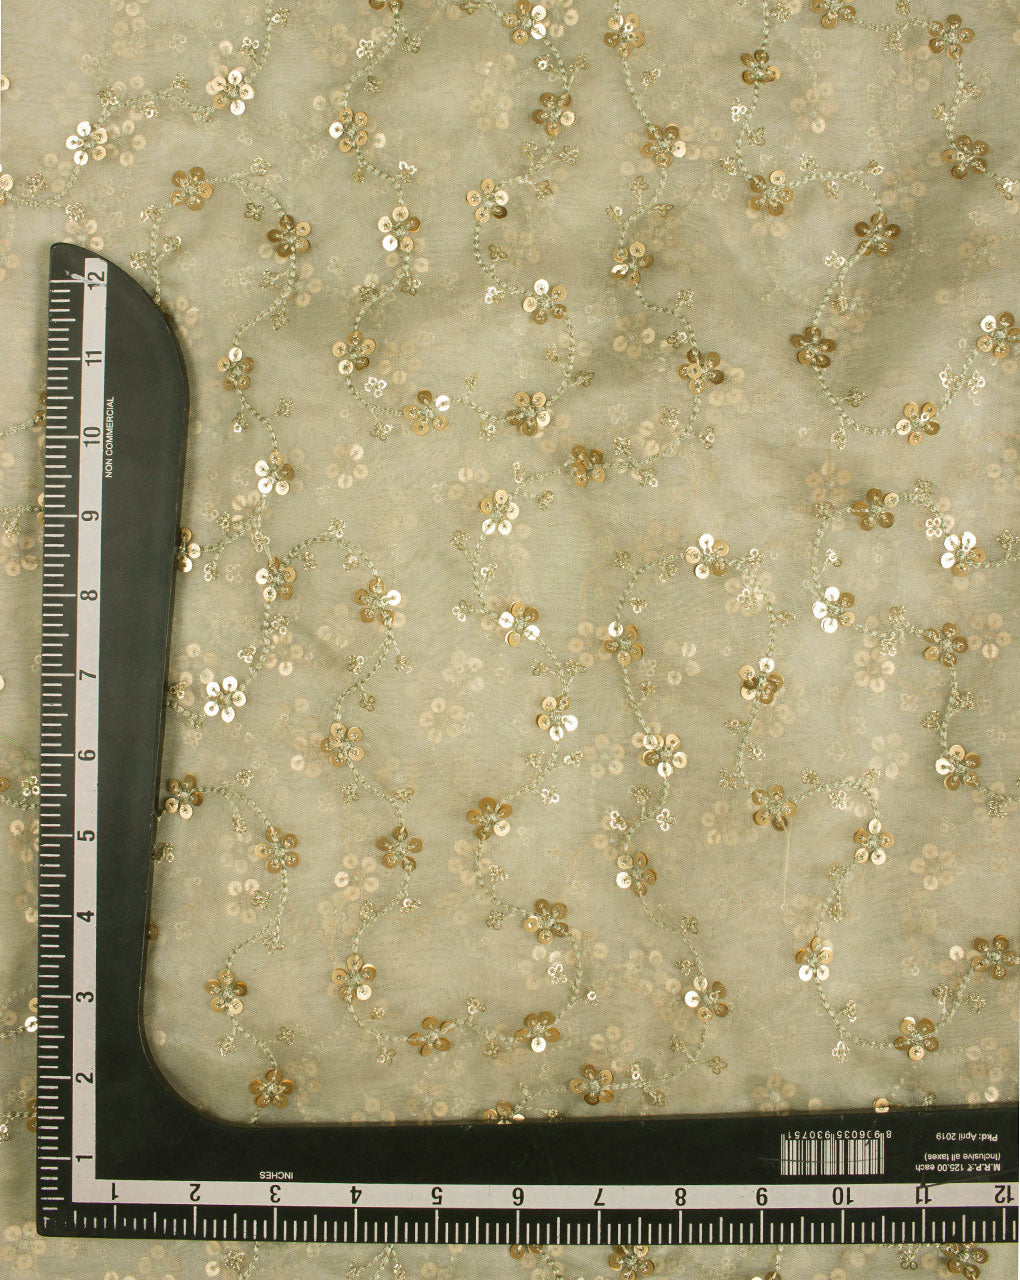 Embroidered Sequins Work Organza Fabric - Fabriclore.com